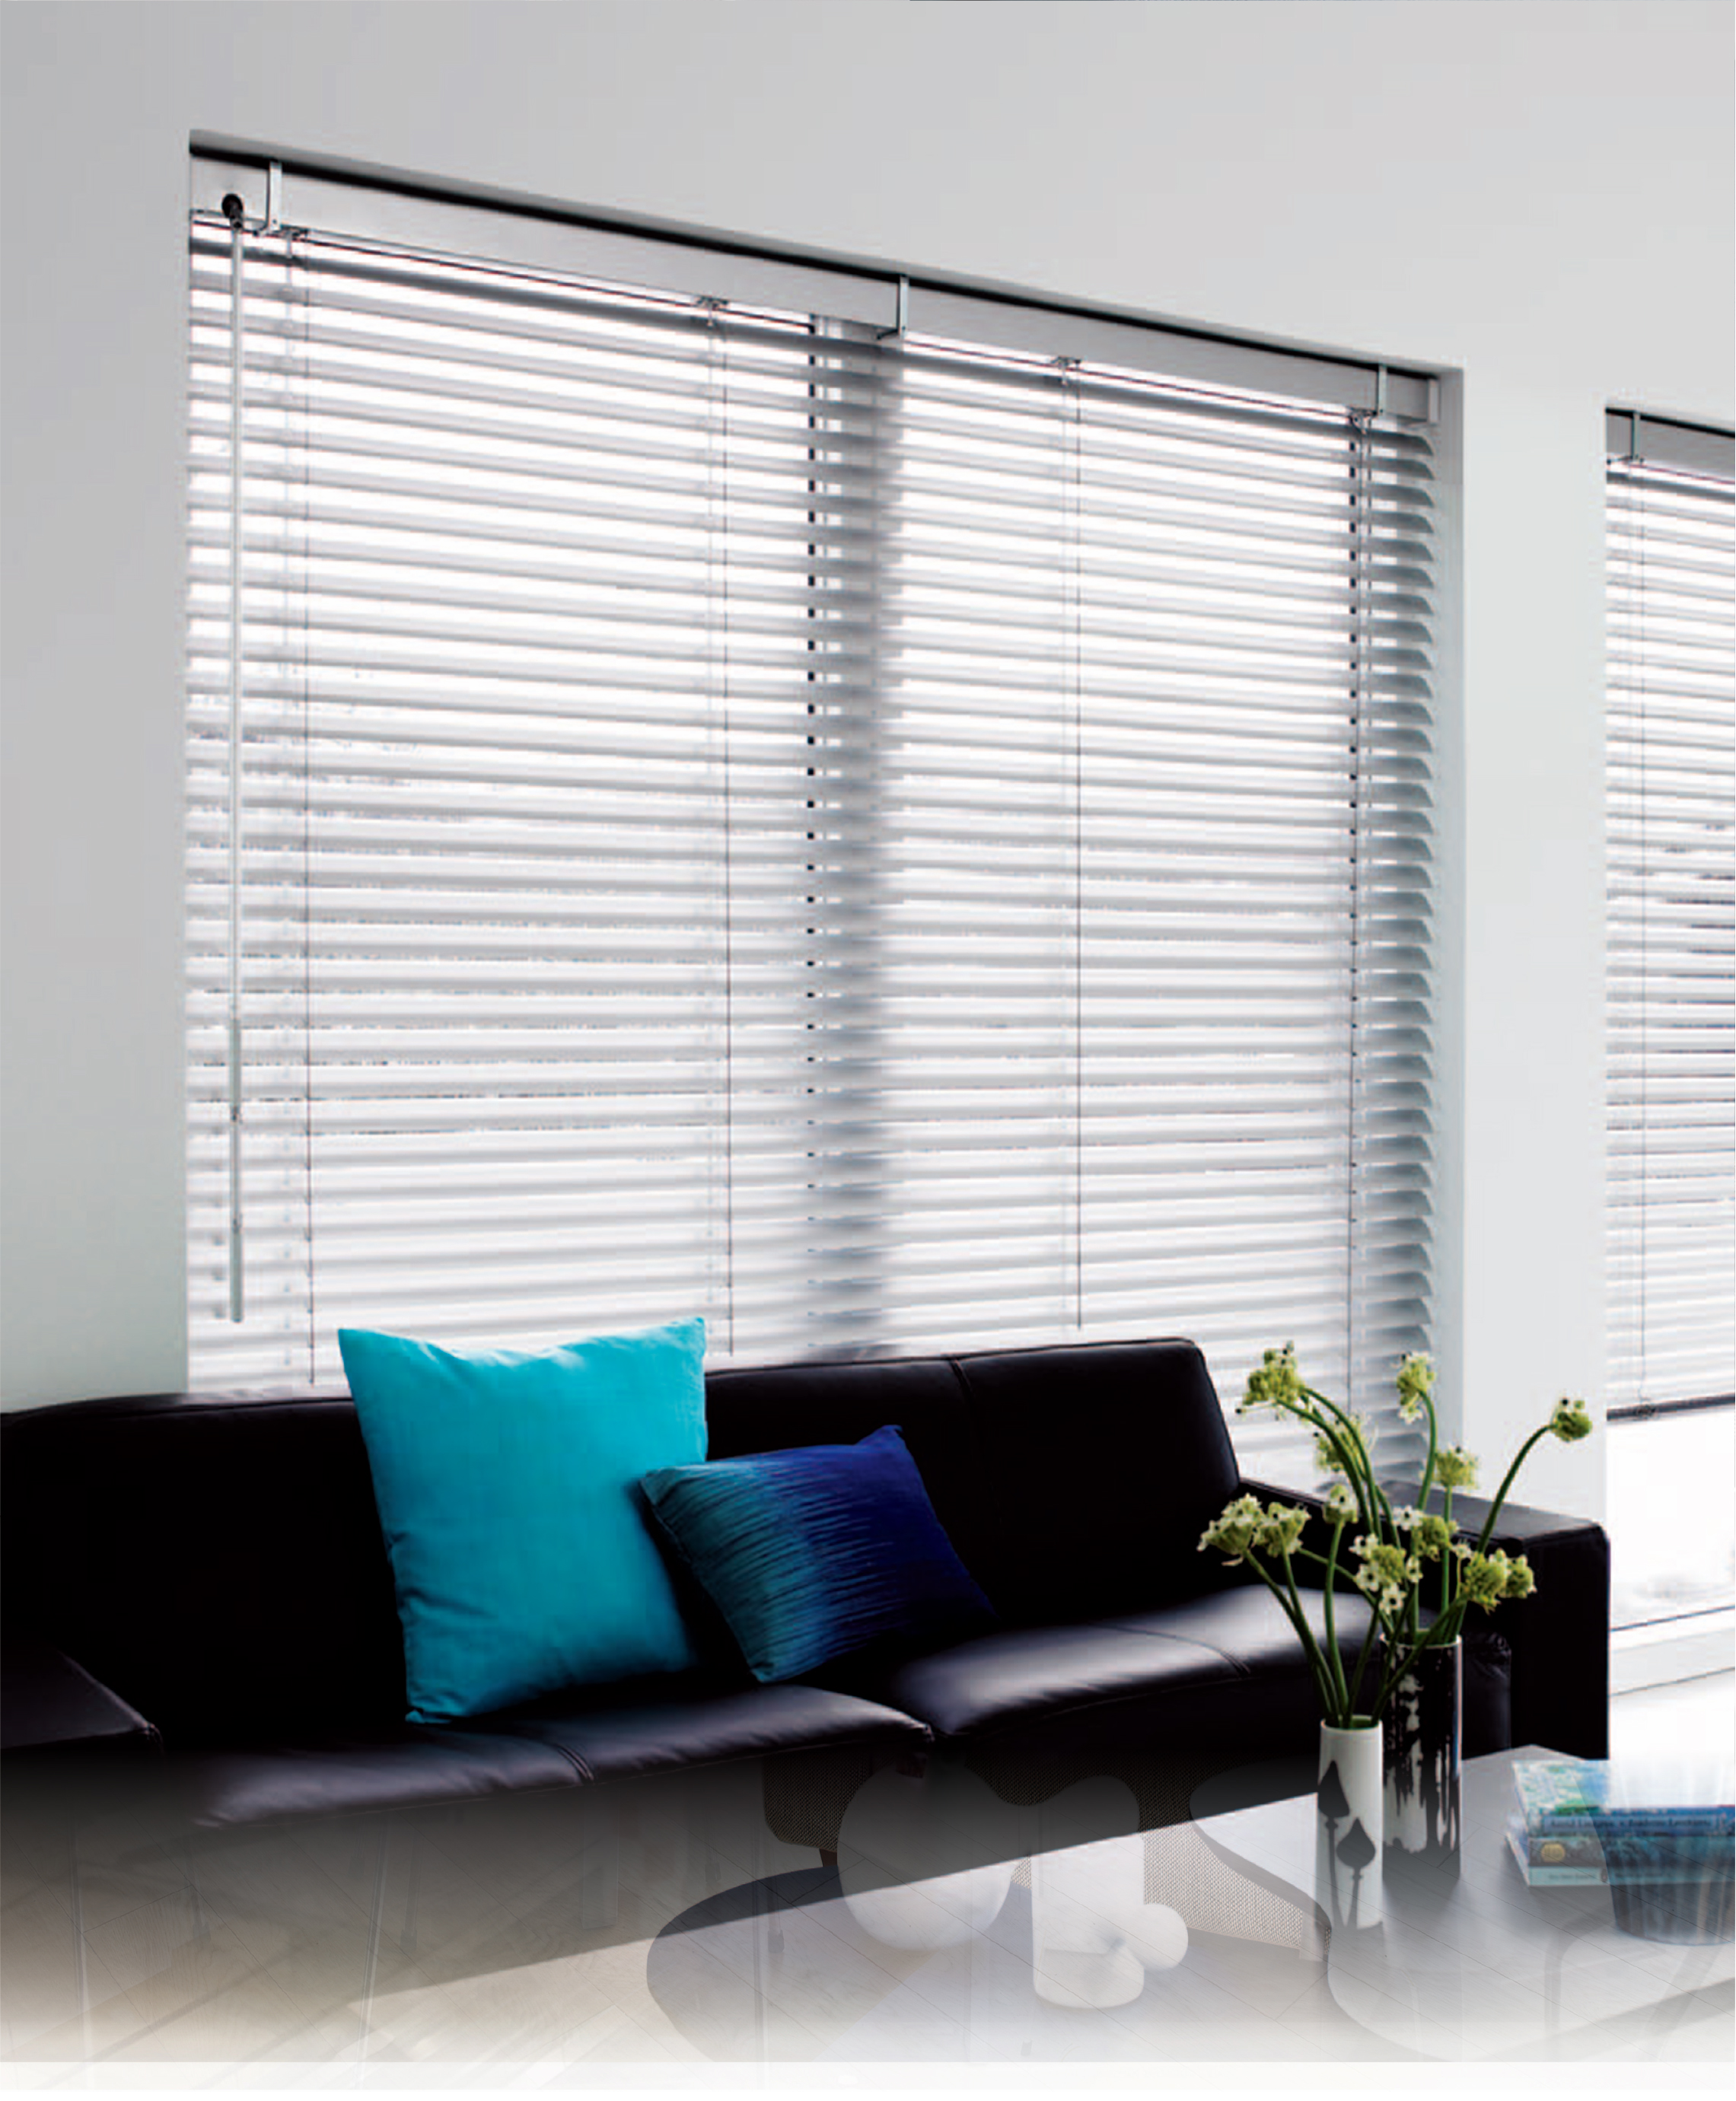 Are wooden blinds the right choice for my home décor?